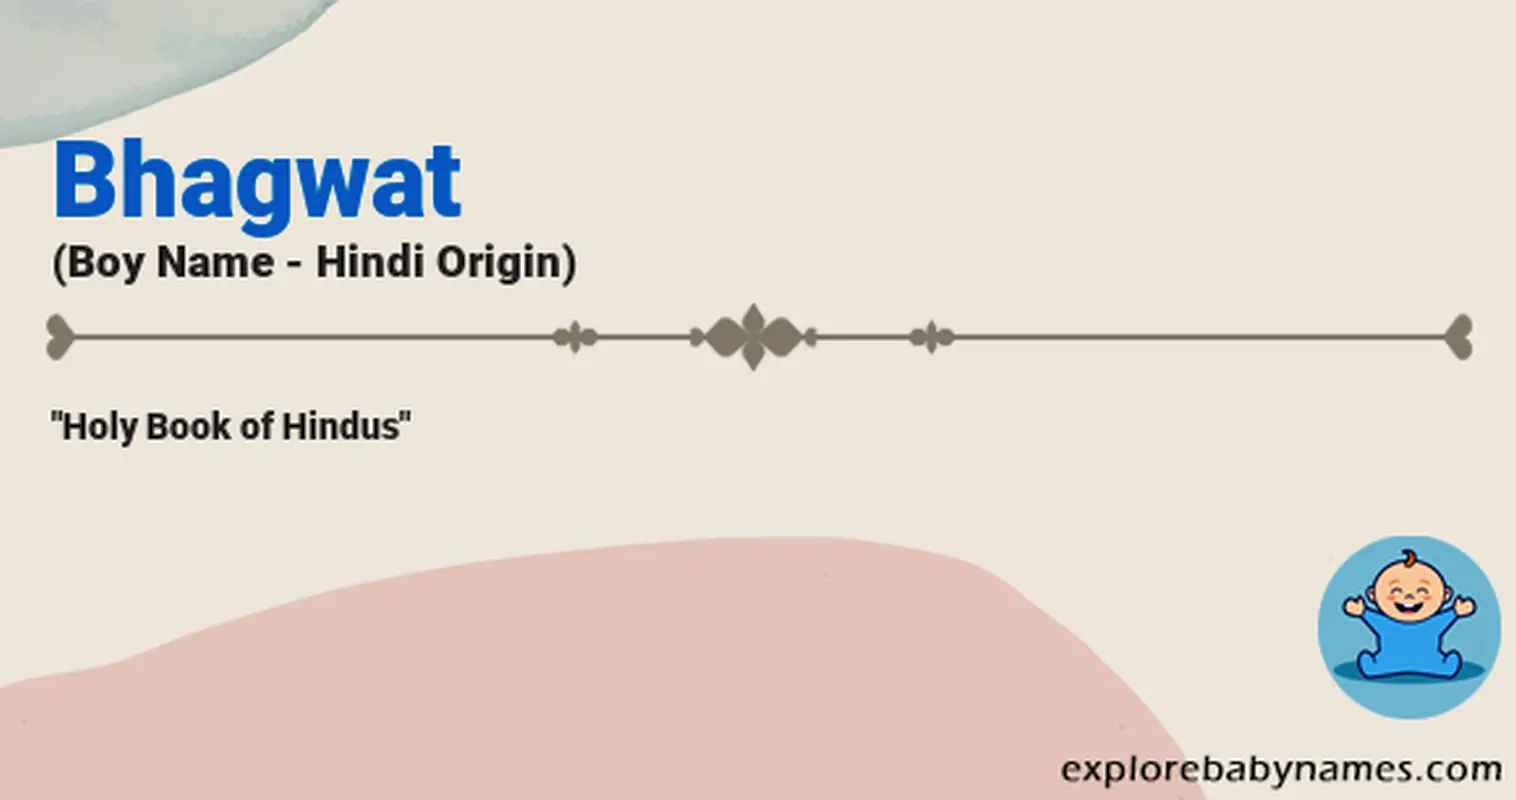 Meaning of Bhagwat